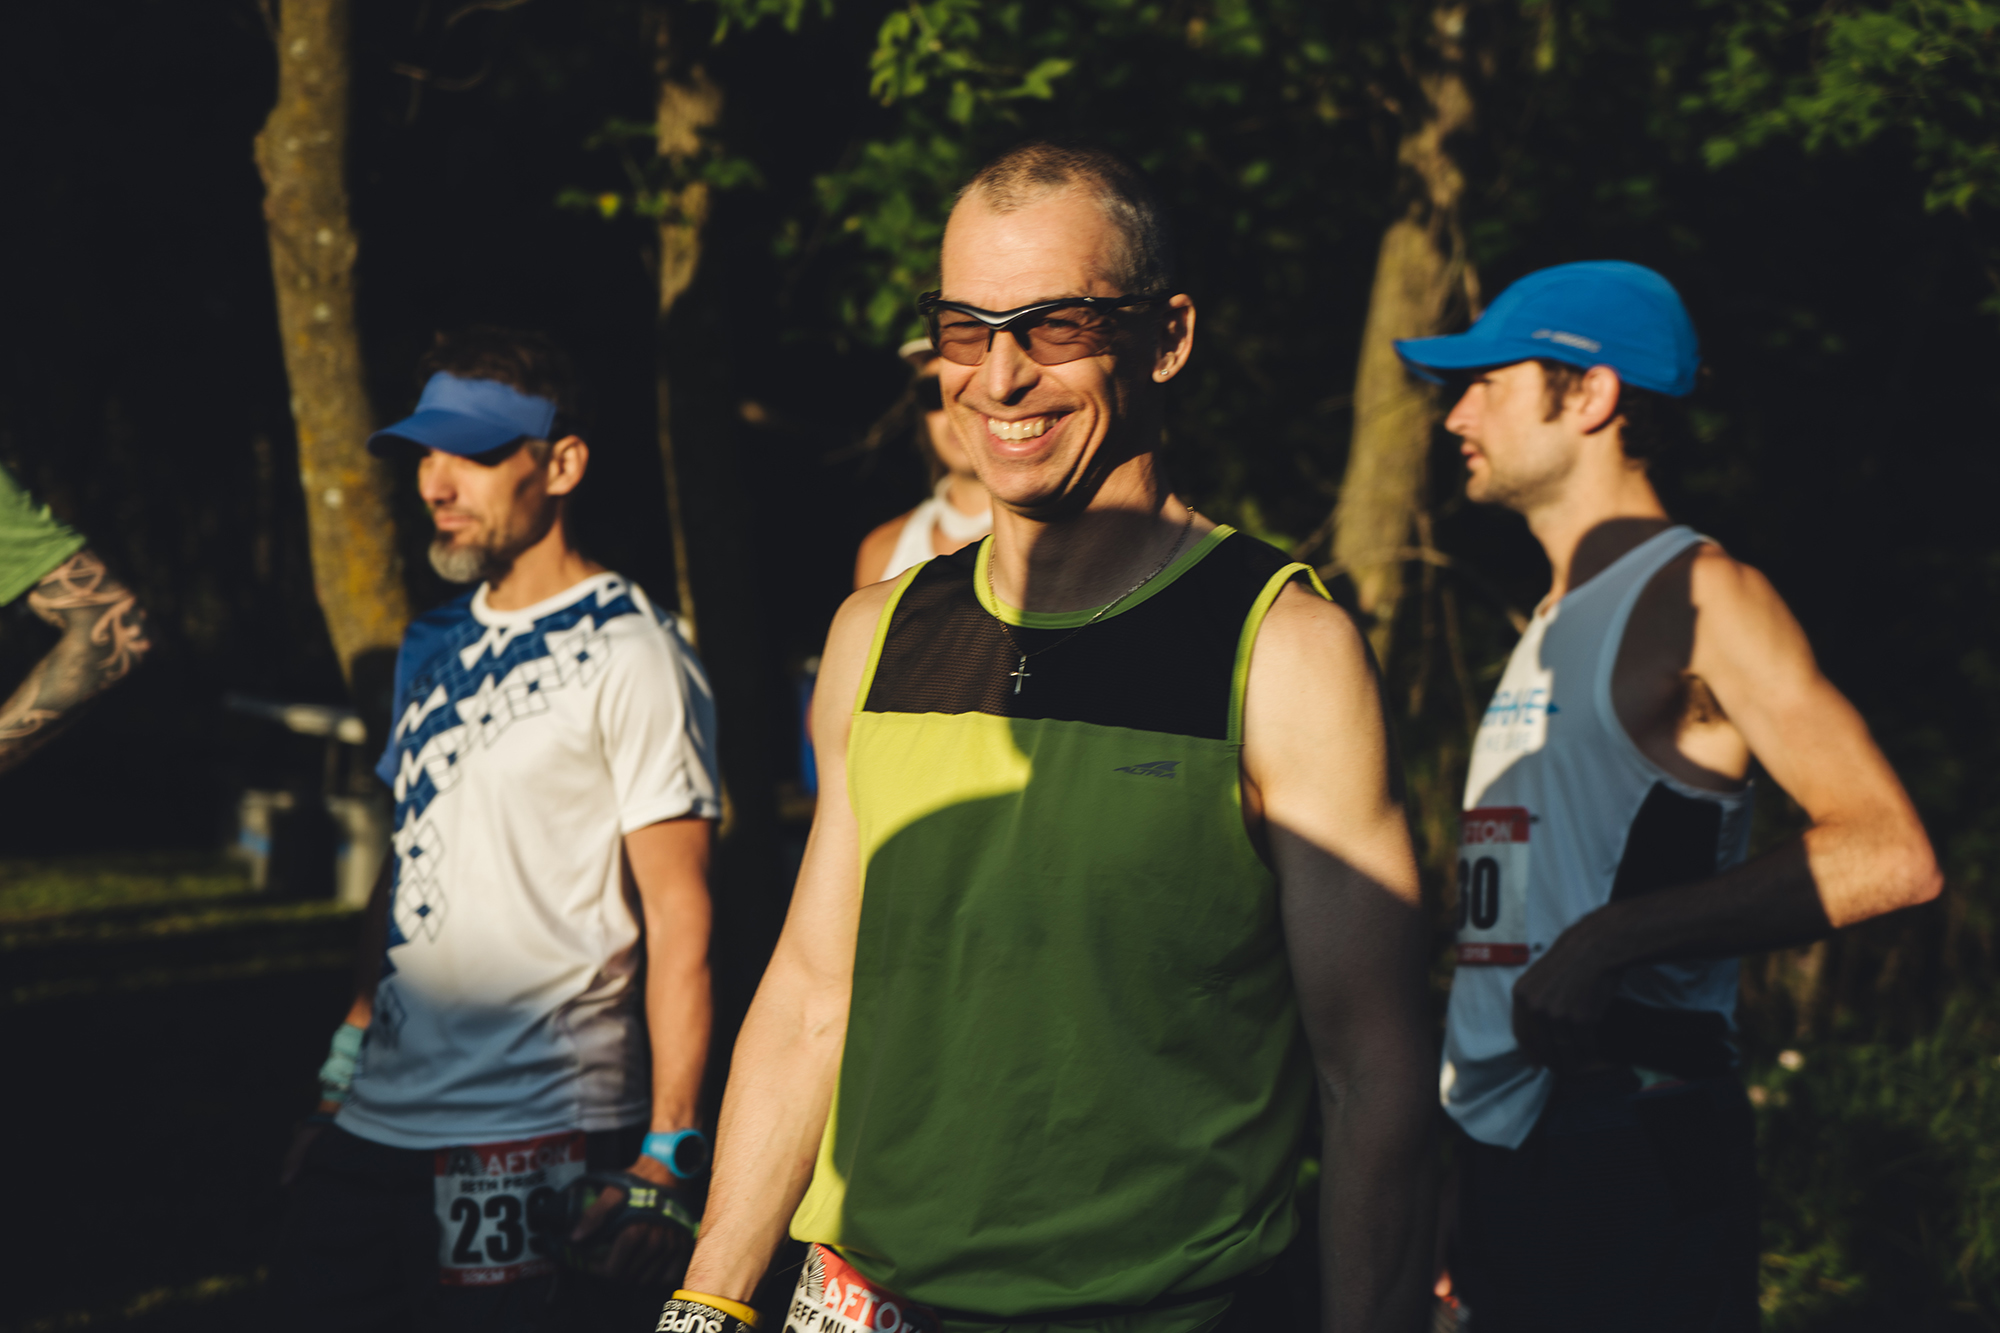 About – Grand Masters Running